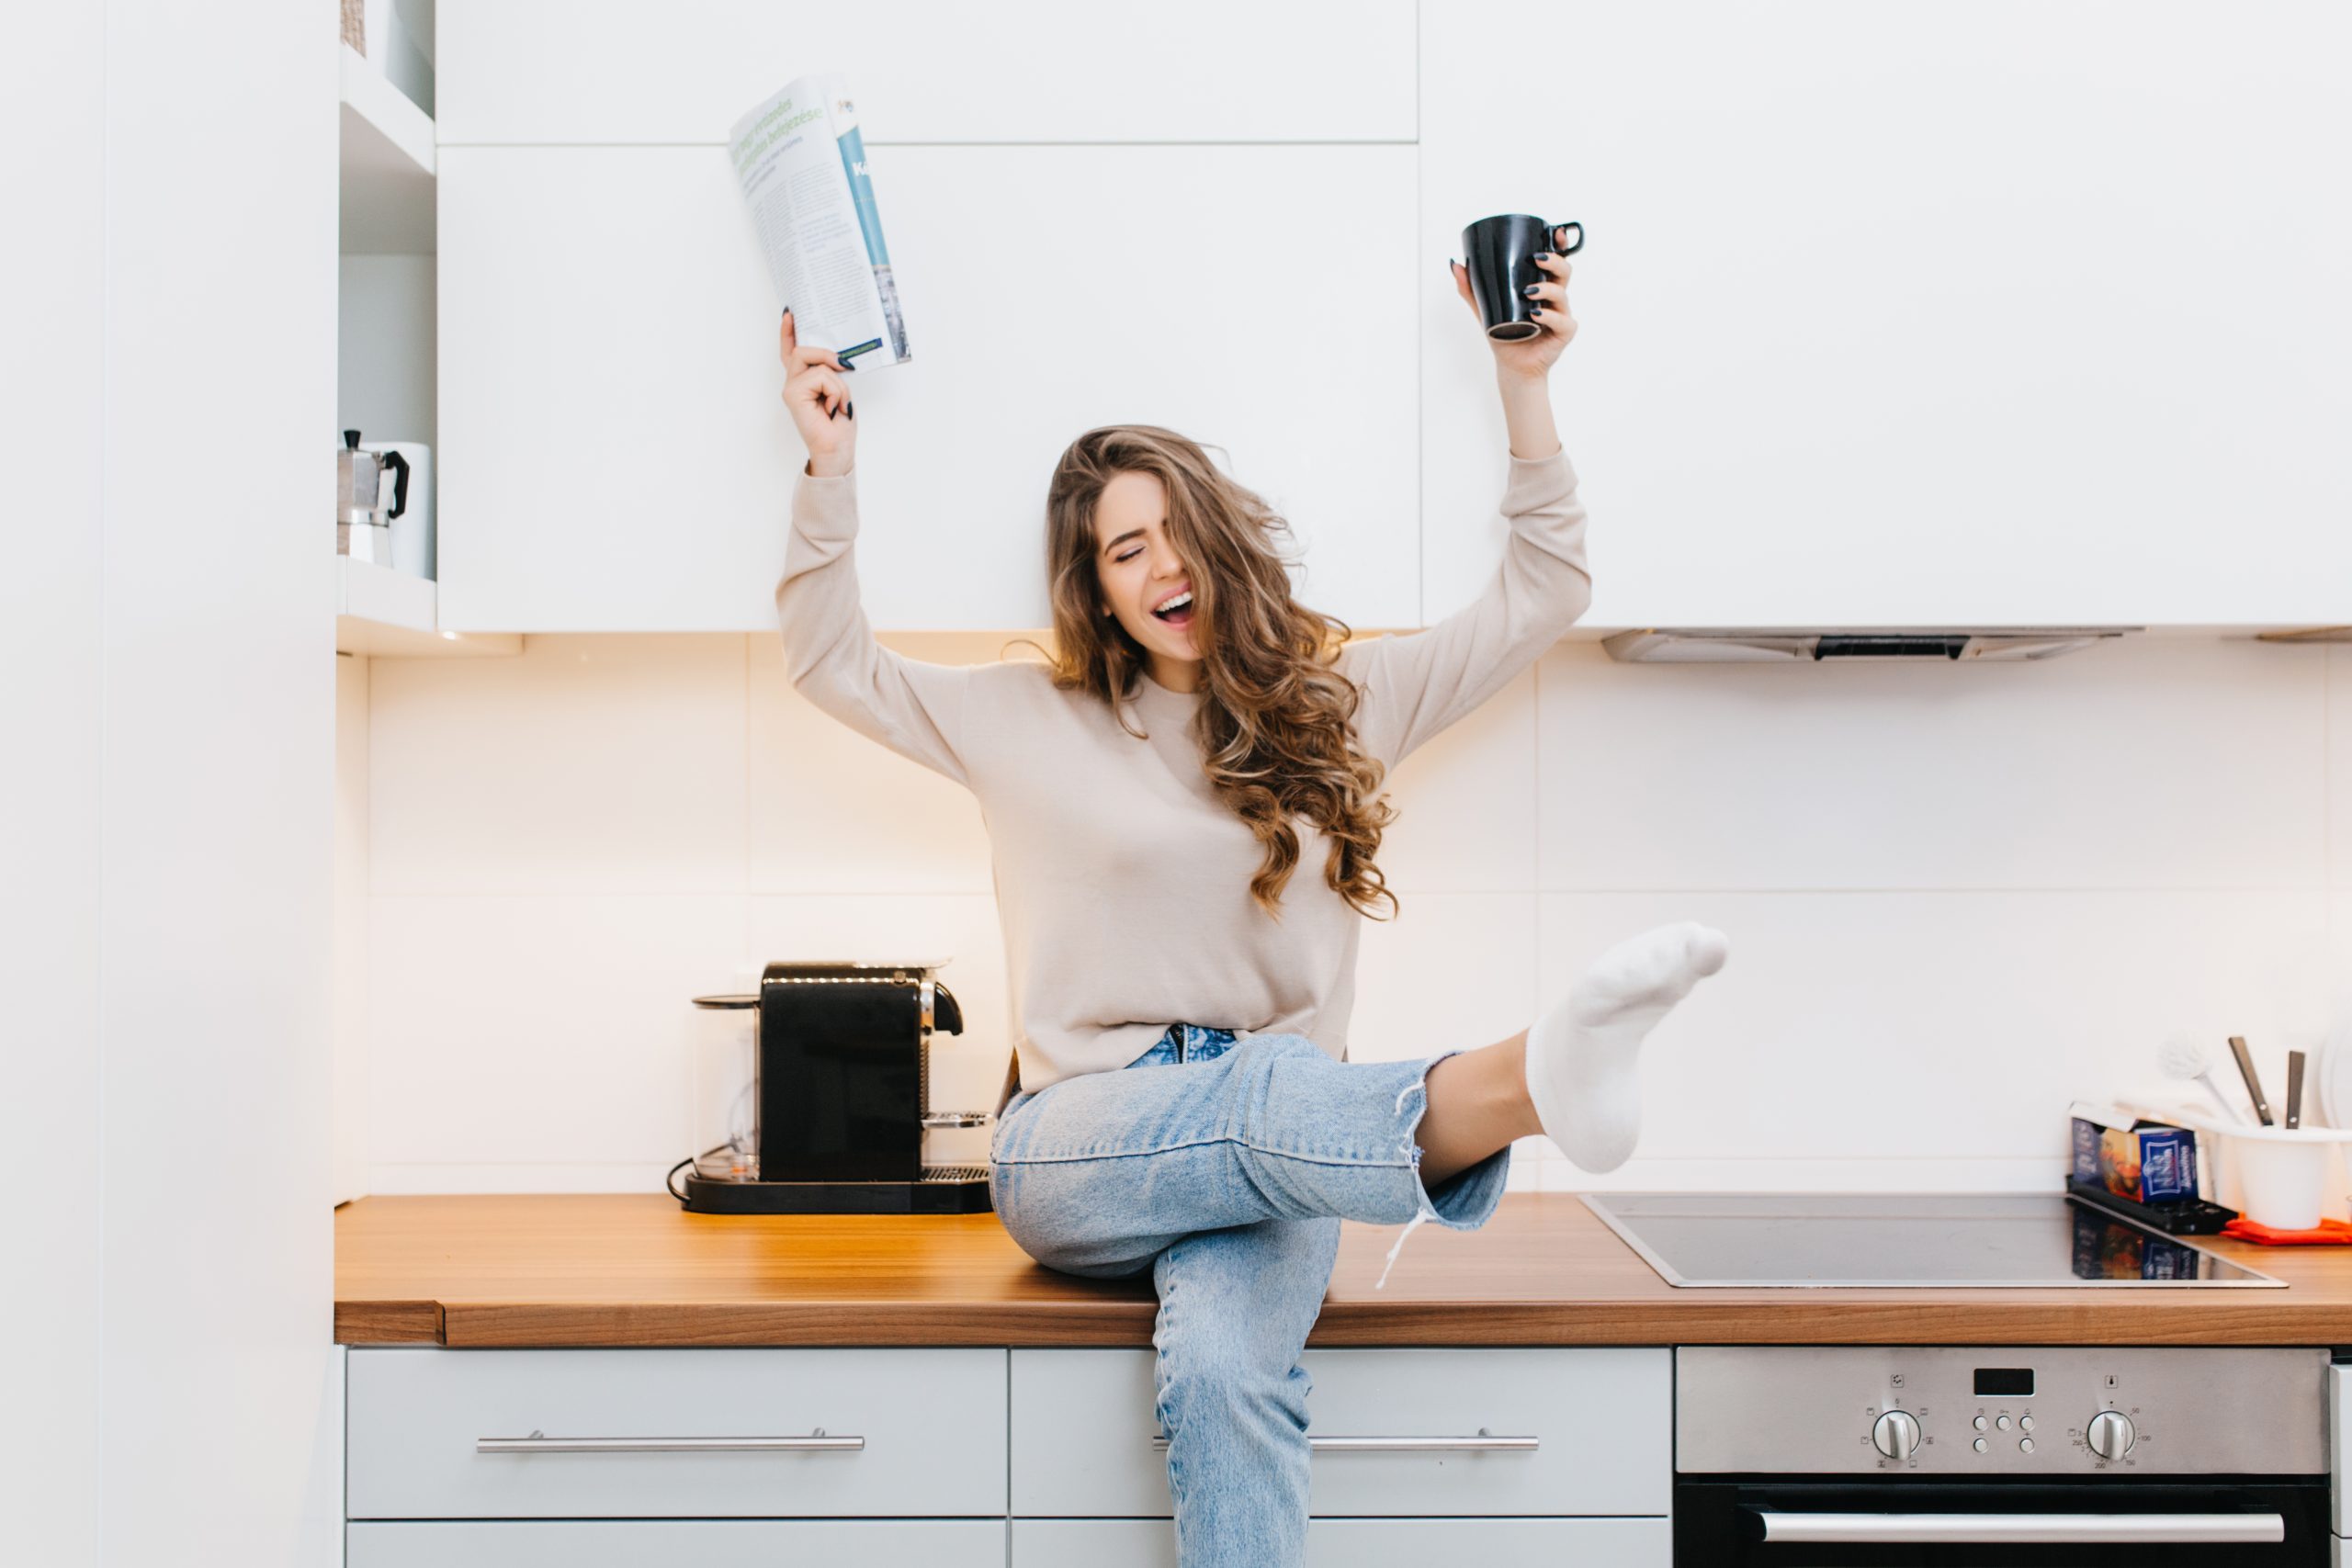 Graceful Caucasian girl wears jeans enjoying good morning in her kitchen. Indoor portrait of emotional female model drinking coffee and reading magazine..